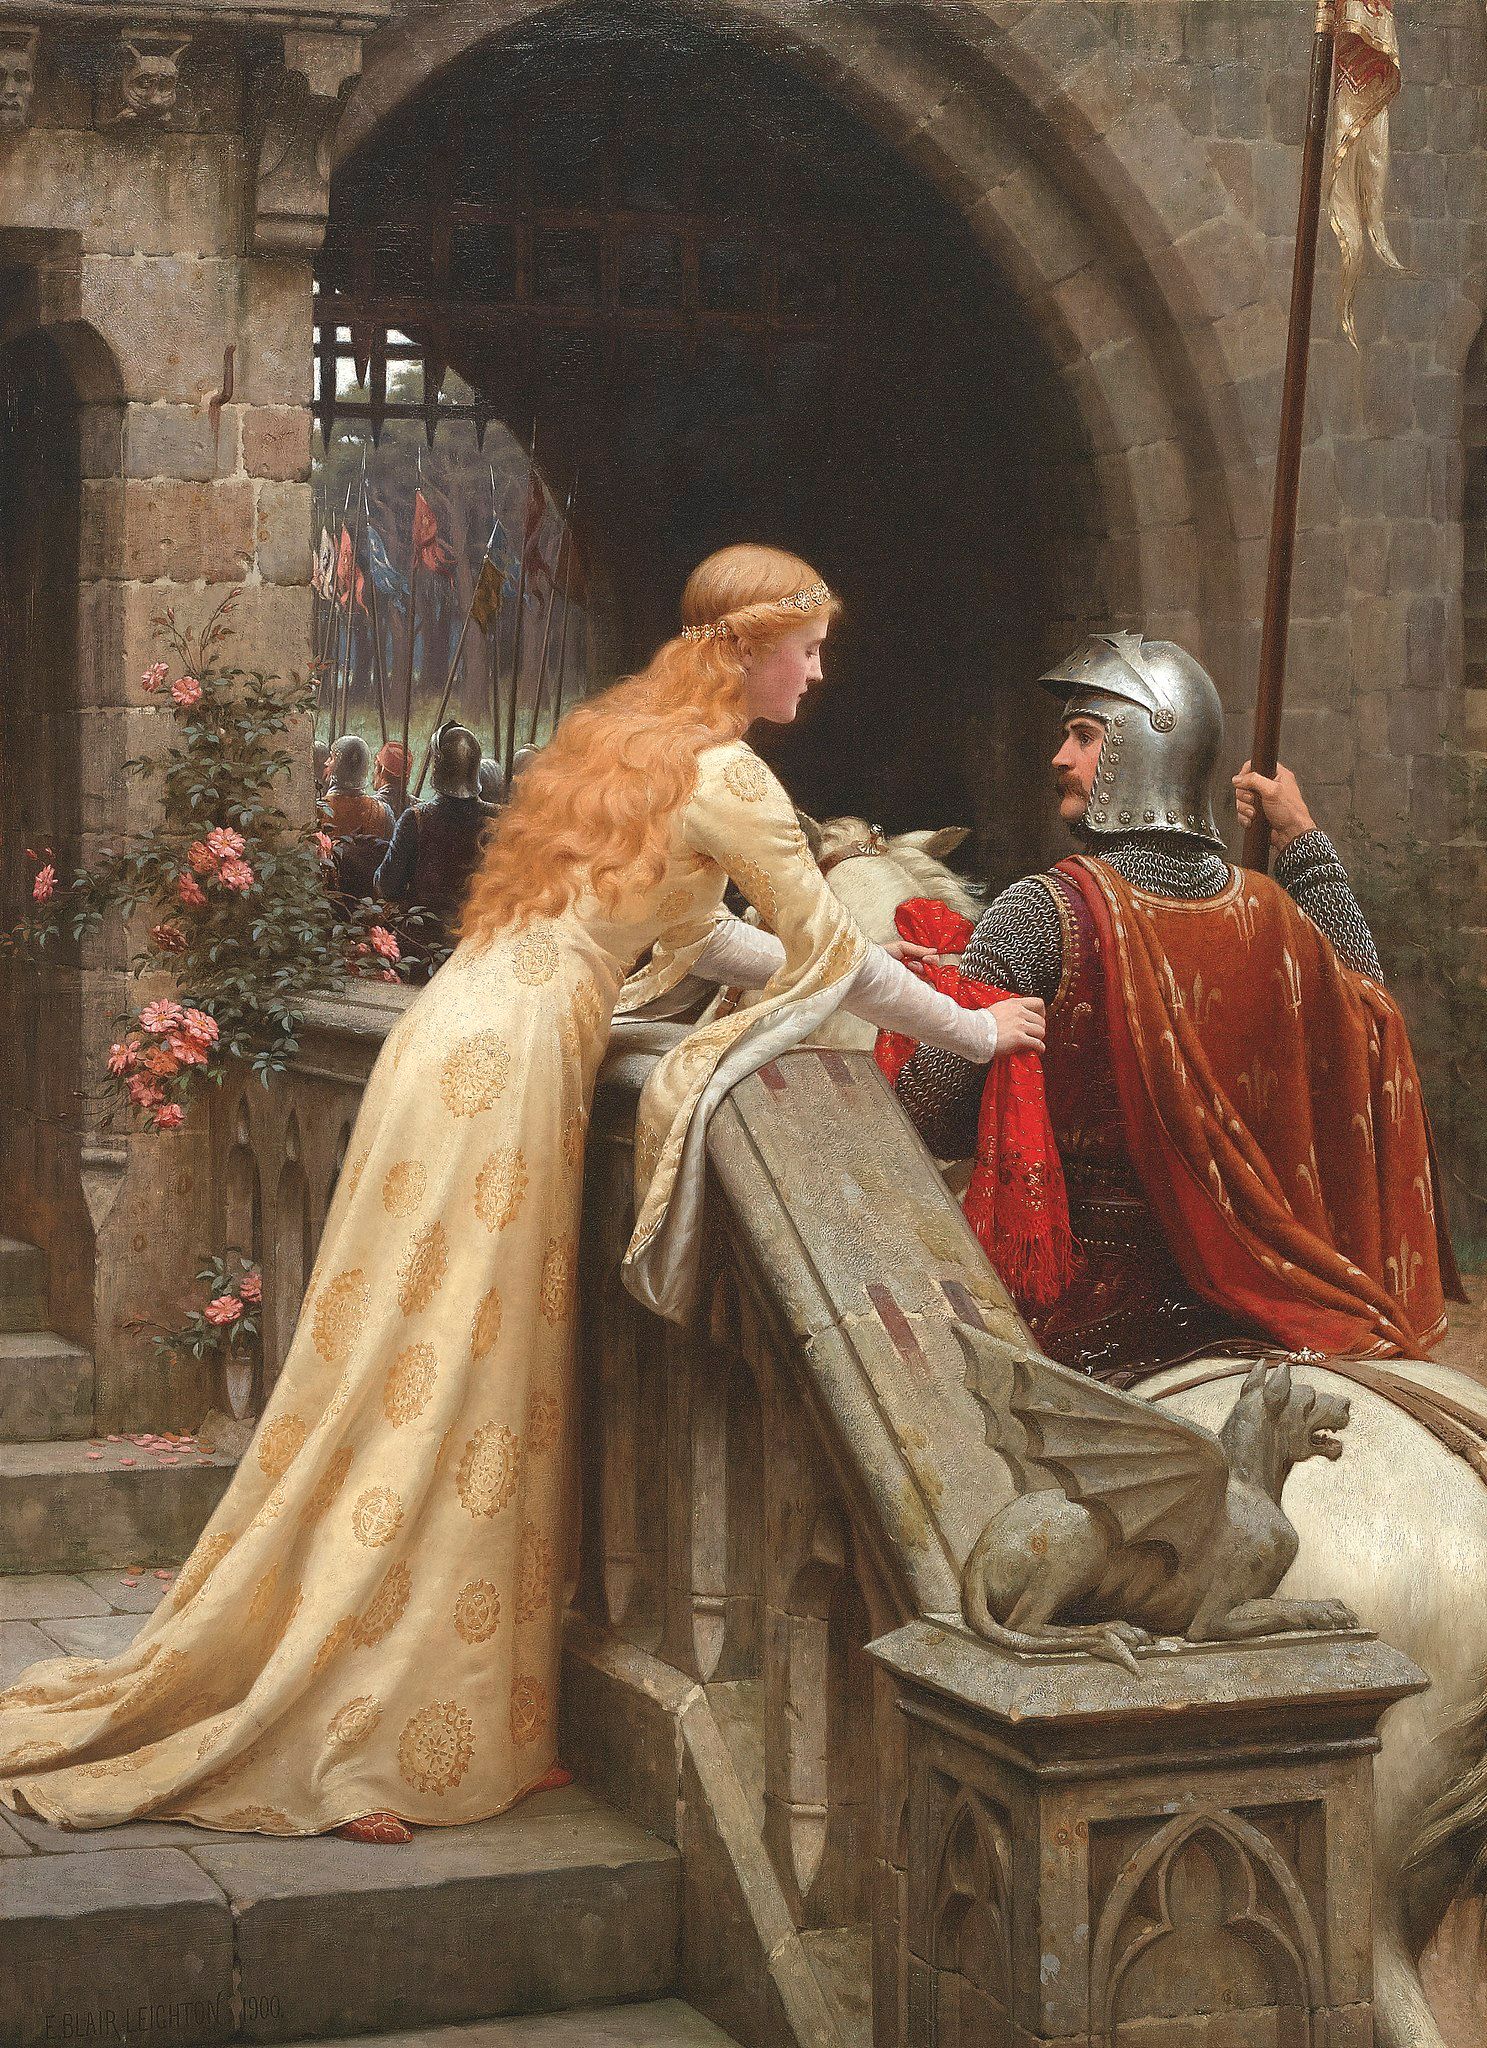 Courtly love in medieval Europe a virtuous love that emphasized nobility and chivalry. God Speed by Edmund Leighton, 1900. Wikimedia Commons.